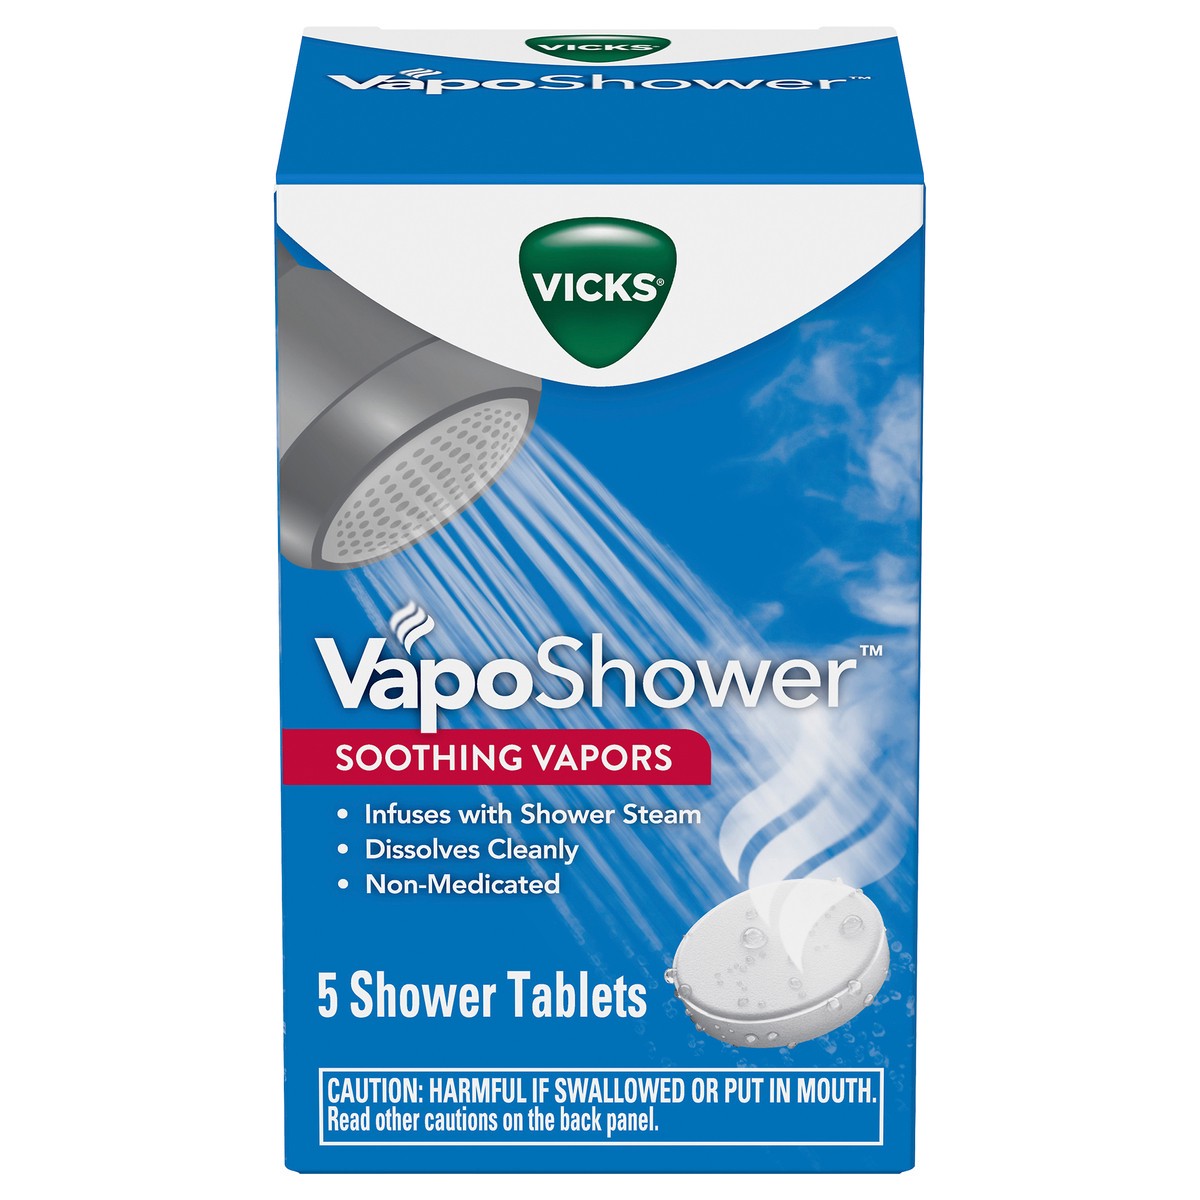 slide 1 of 145, Vicks VapoShower, Dissolvable Shower Tablets, Soothing Non-Medicated Vicks Vapors, Infuses into Shower Steam, Dissolves Cleanly, Aromatherapy Shower Bomb, Eucalyptus & Menthol, 5ct, 5 ct